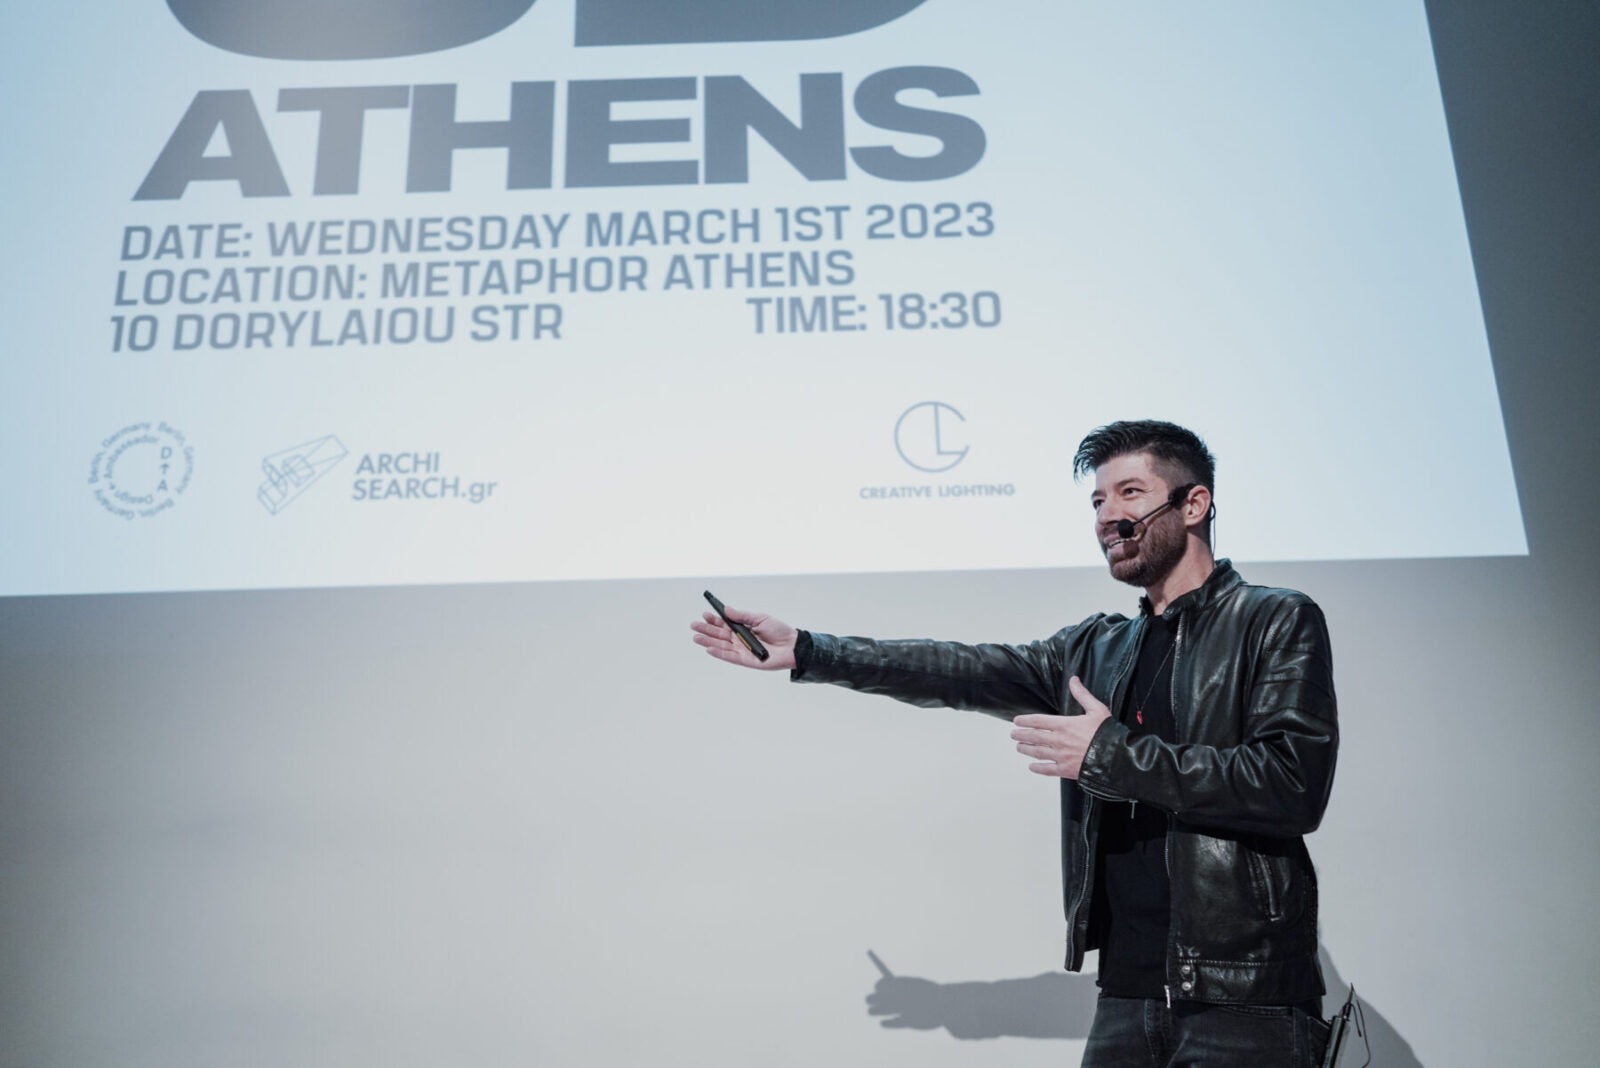 Archisearch WHAT HAPPENED AT THE THIRD 3D MEETUP ATHENS AT METAPHOR ATHENS BY CREATIVE LIGHTING & DESIGN AMBASSADOR